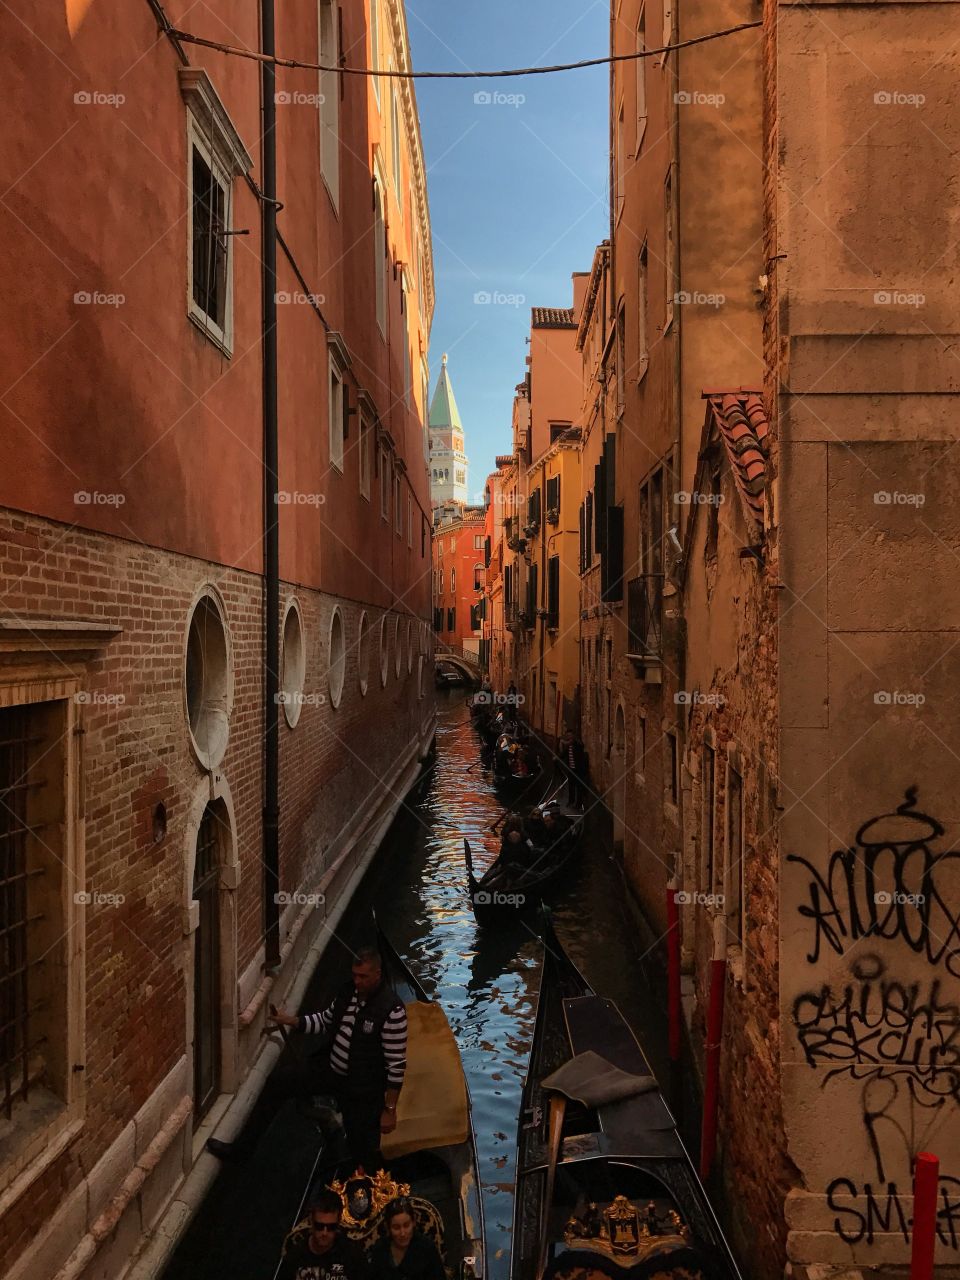 One of the many canals of Venice, Italy.